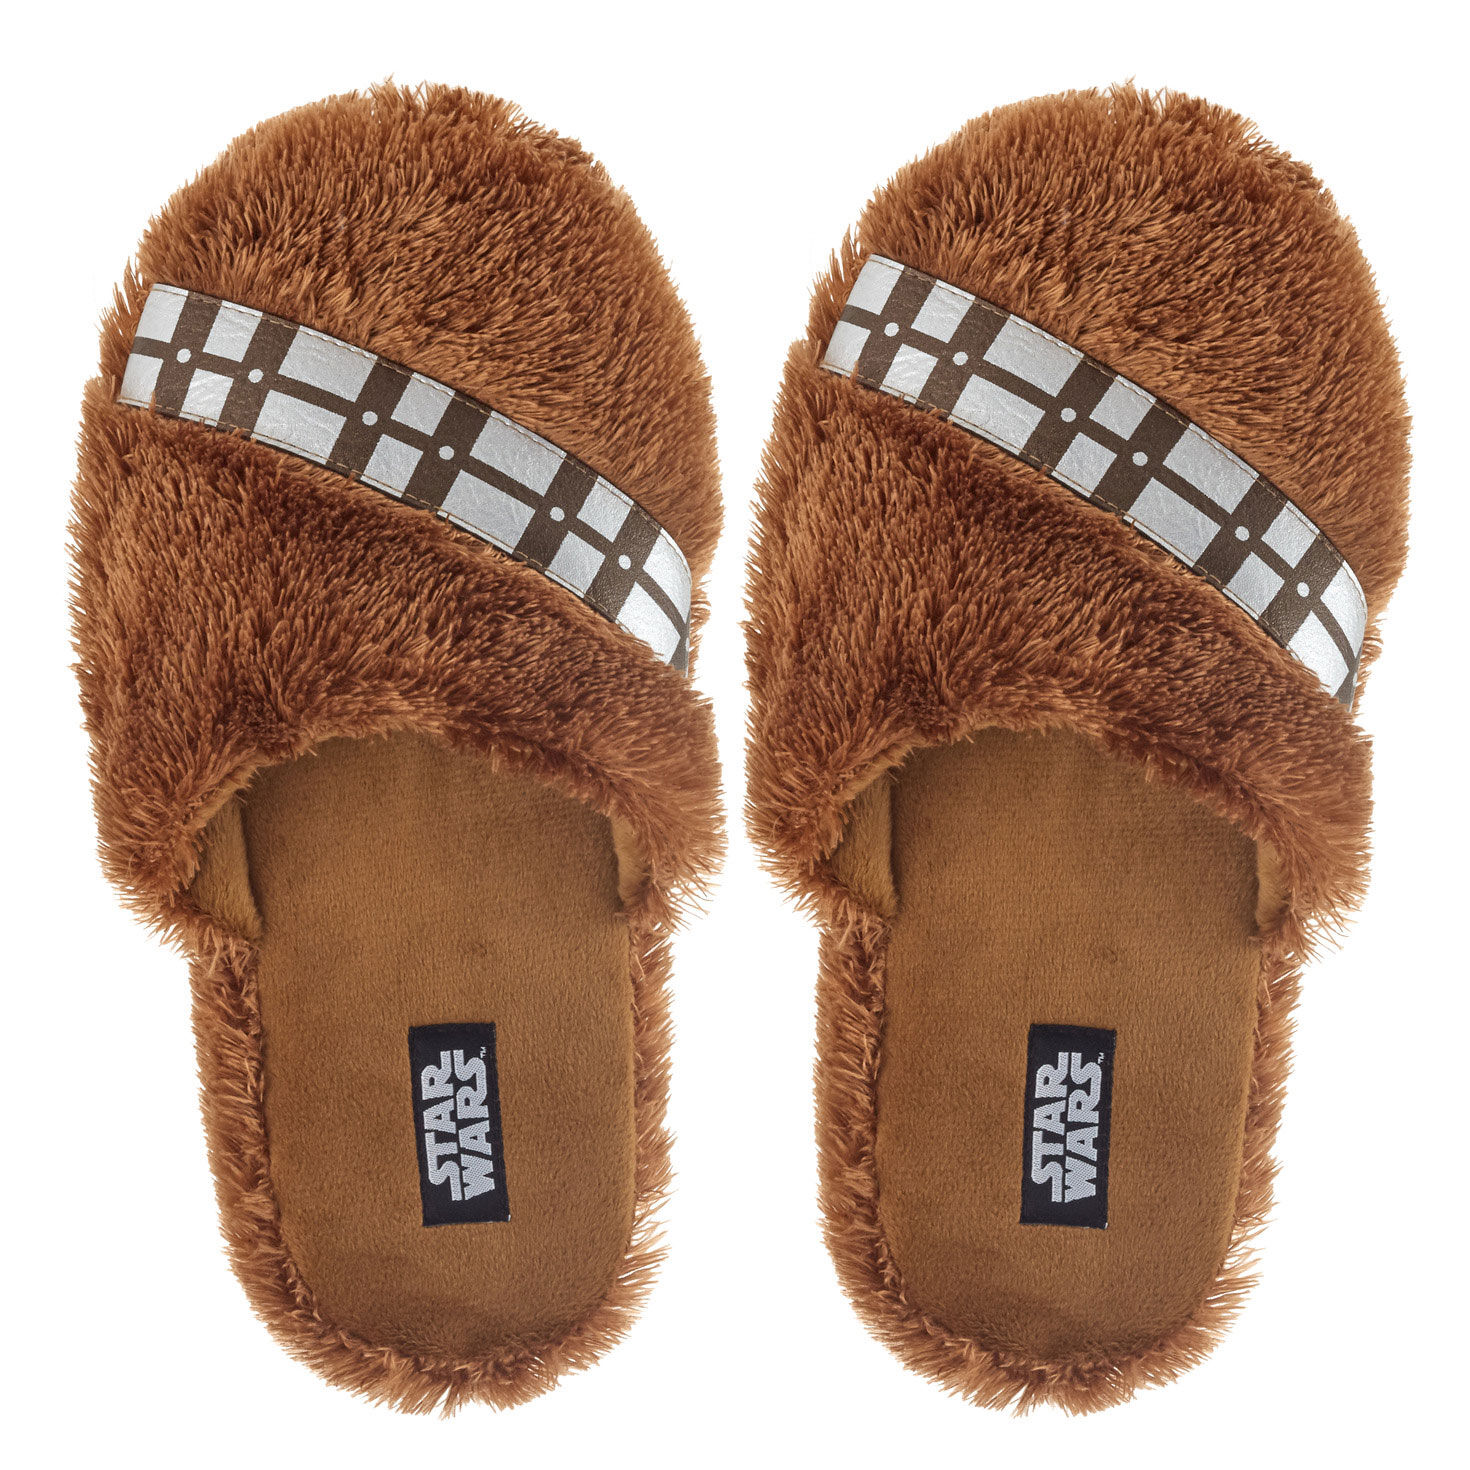 Star Wars™ Chewbacca™ Slippers With Sound for only USD 26.99 | Hallmark